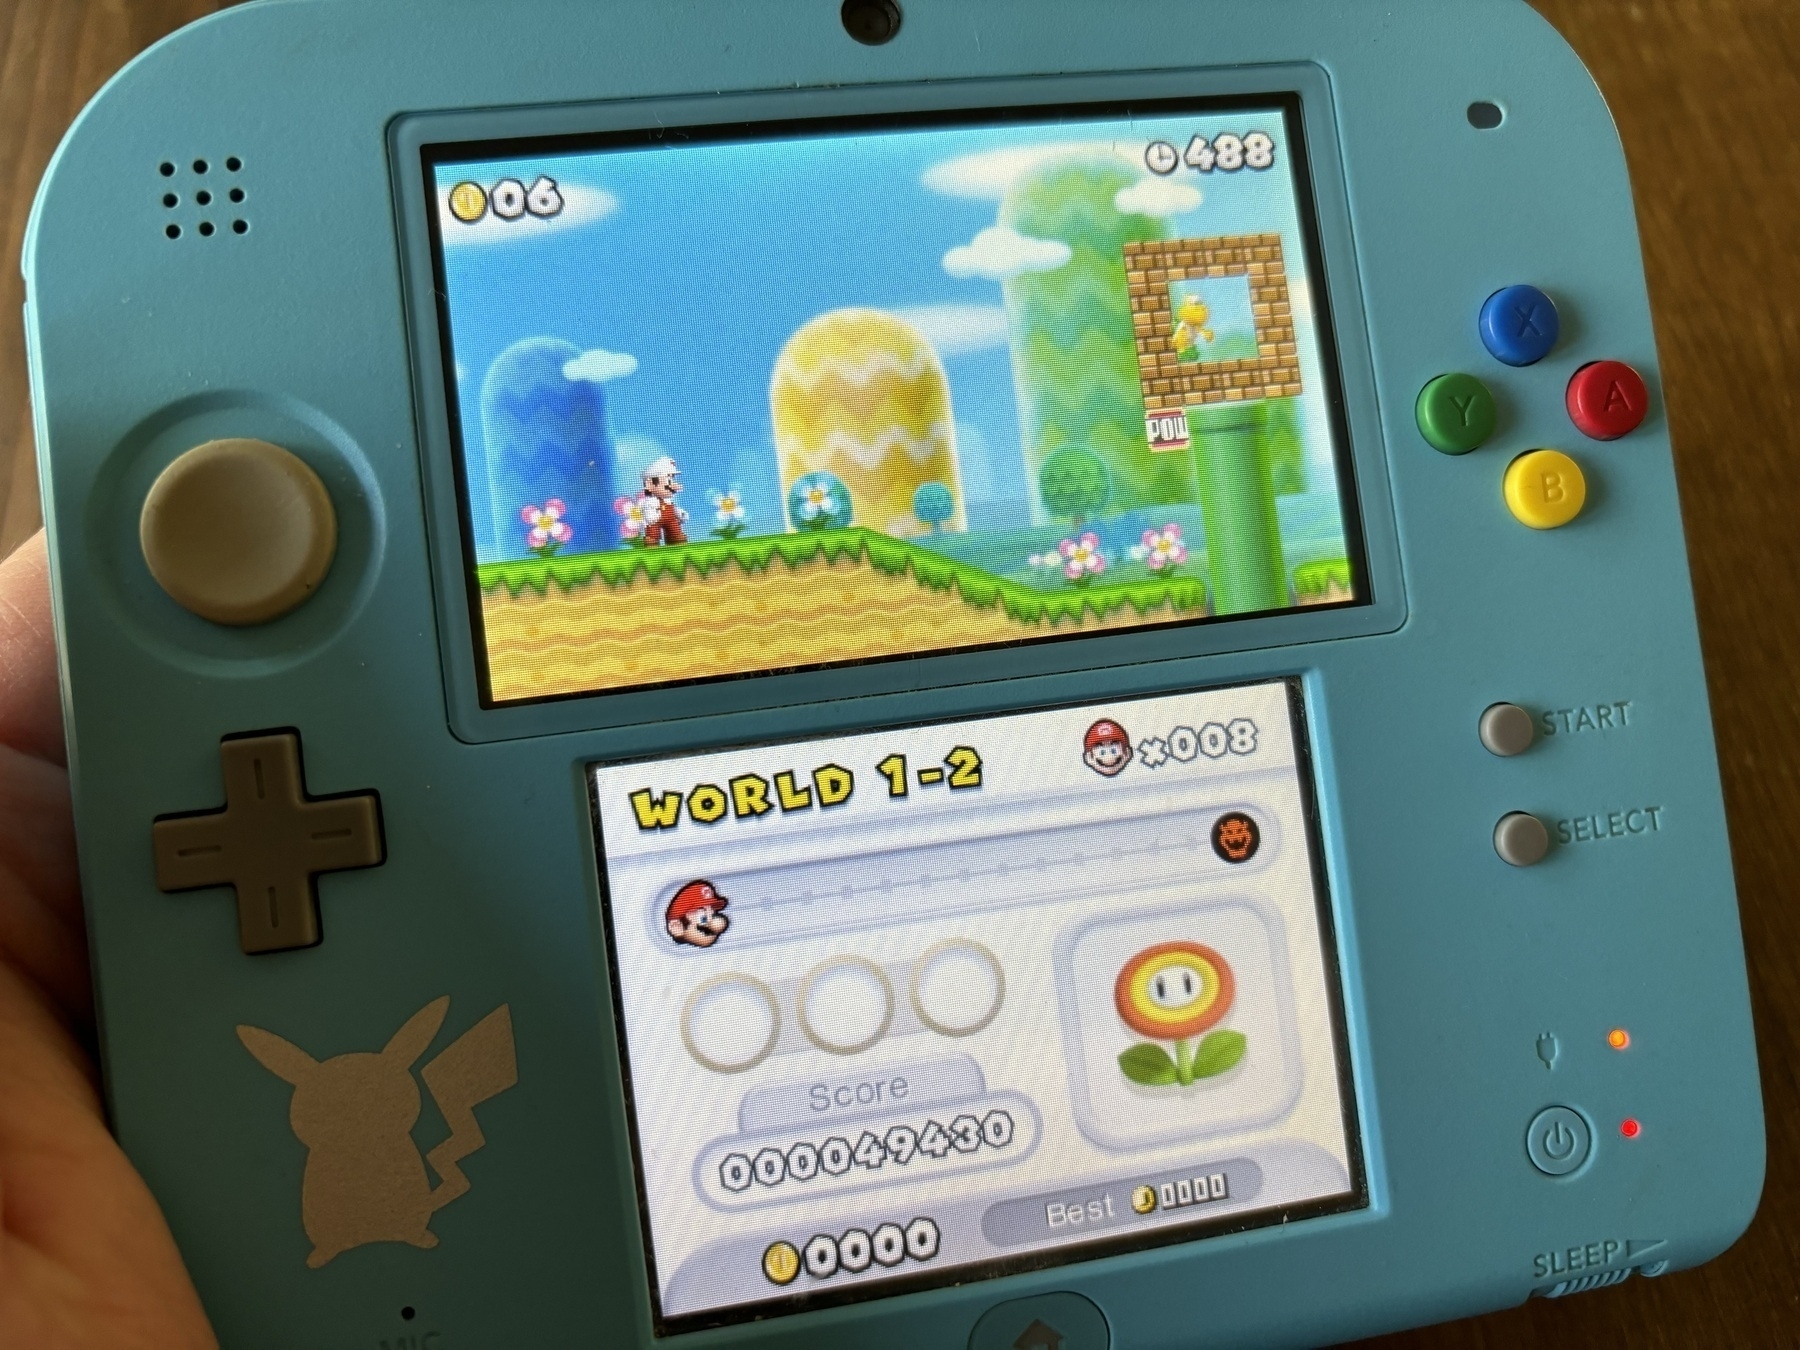 Mario on the 2DS is incredible!